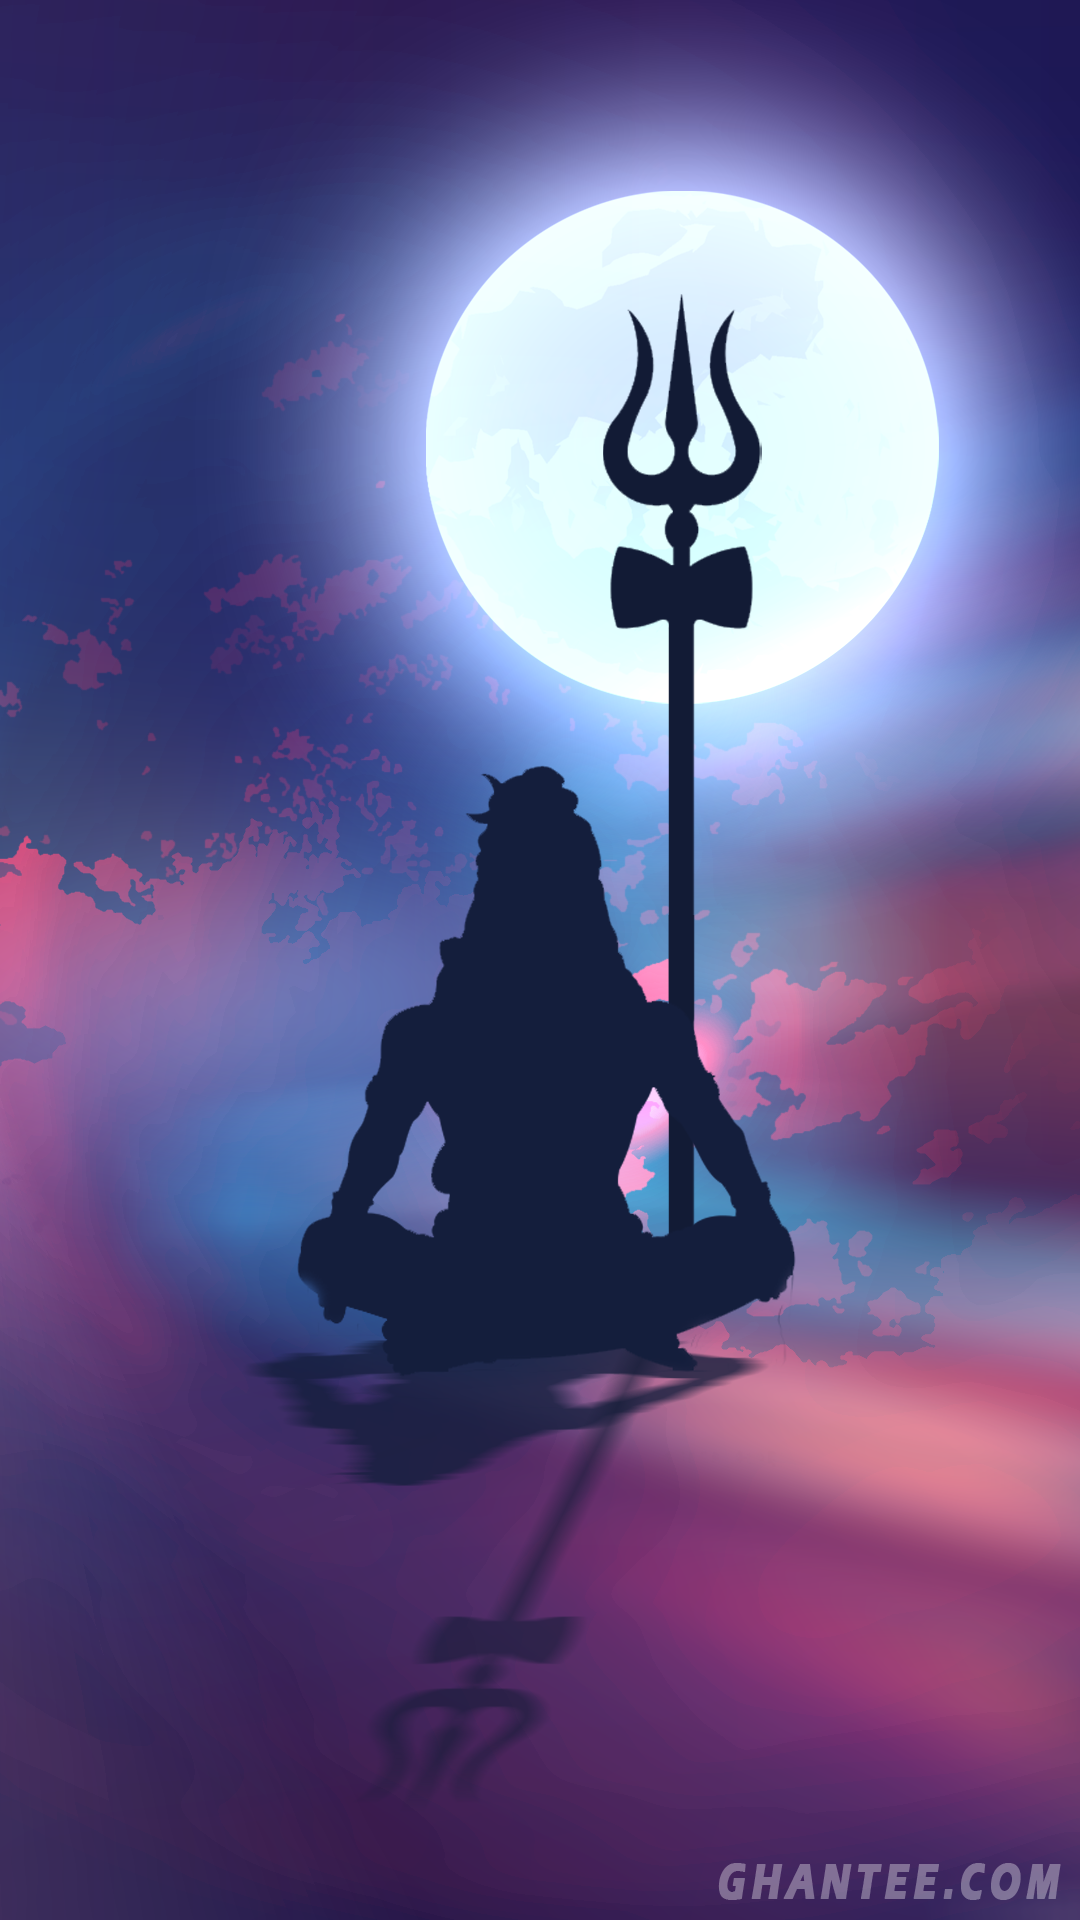 Free download lord shiva silhouette phone wallpaper 1080p Lord shiva statue [1080x1920] for your Desktop, Mobile & Tablet. Explore Shiva Wallpaper. HD Shiva Wallpaper, Lord Shiva Wallpaper, Shiva Image Wallpaper